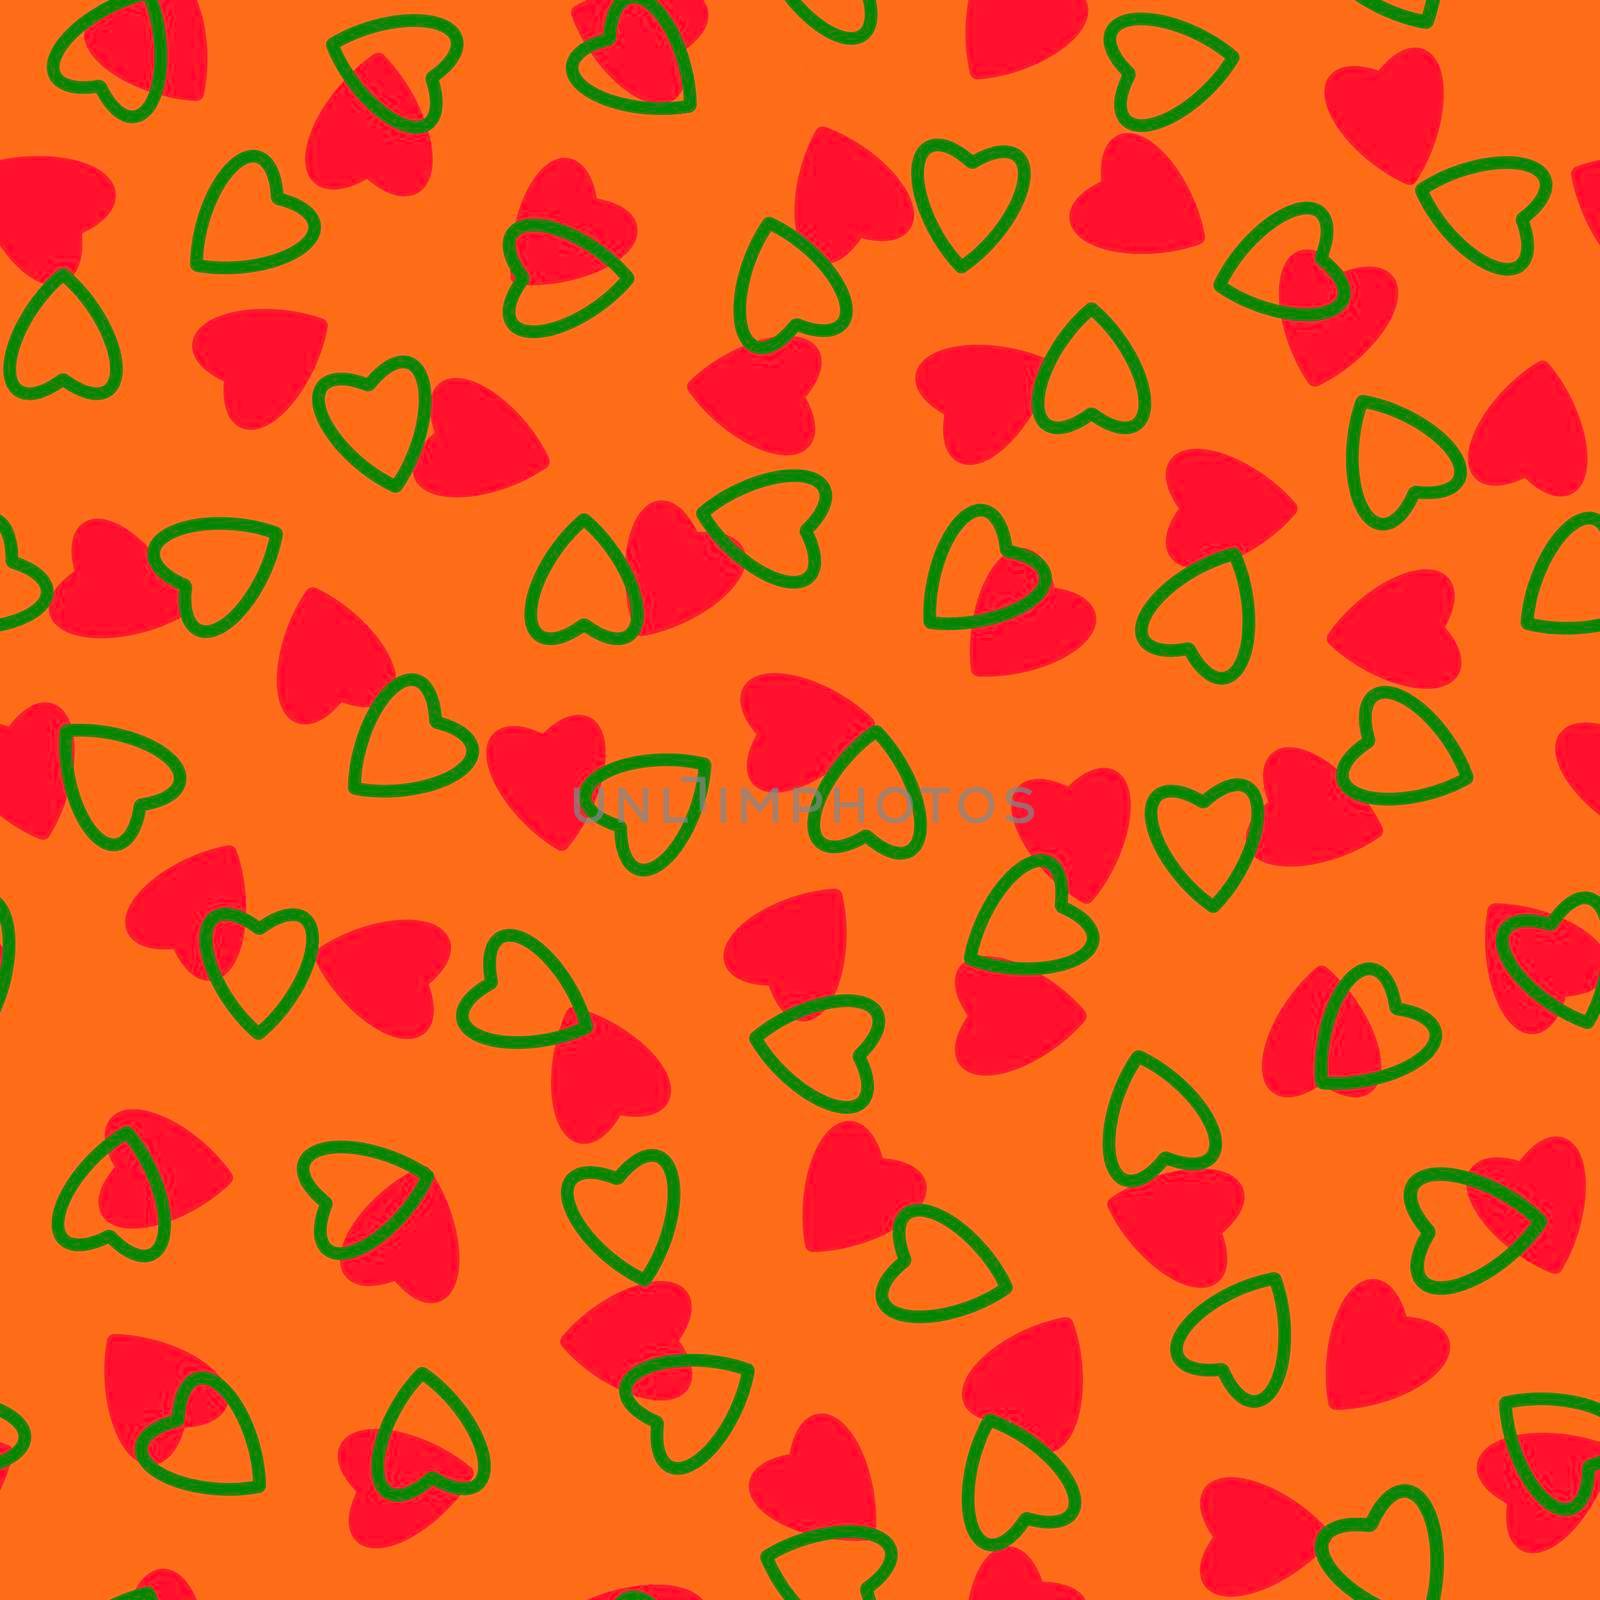 Simple hearts seamless pattern,endless chaotic texture made of tiny heart silhouettes.Valentines,mothers day background.Great for Easter,wedding,scrapbook,gift wrapping paper,textiles.Red,green,orange by Angelsmoon